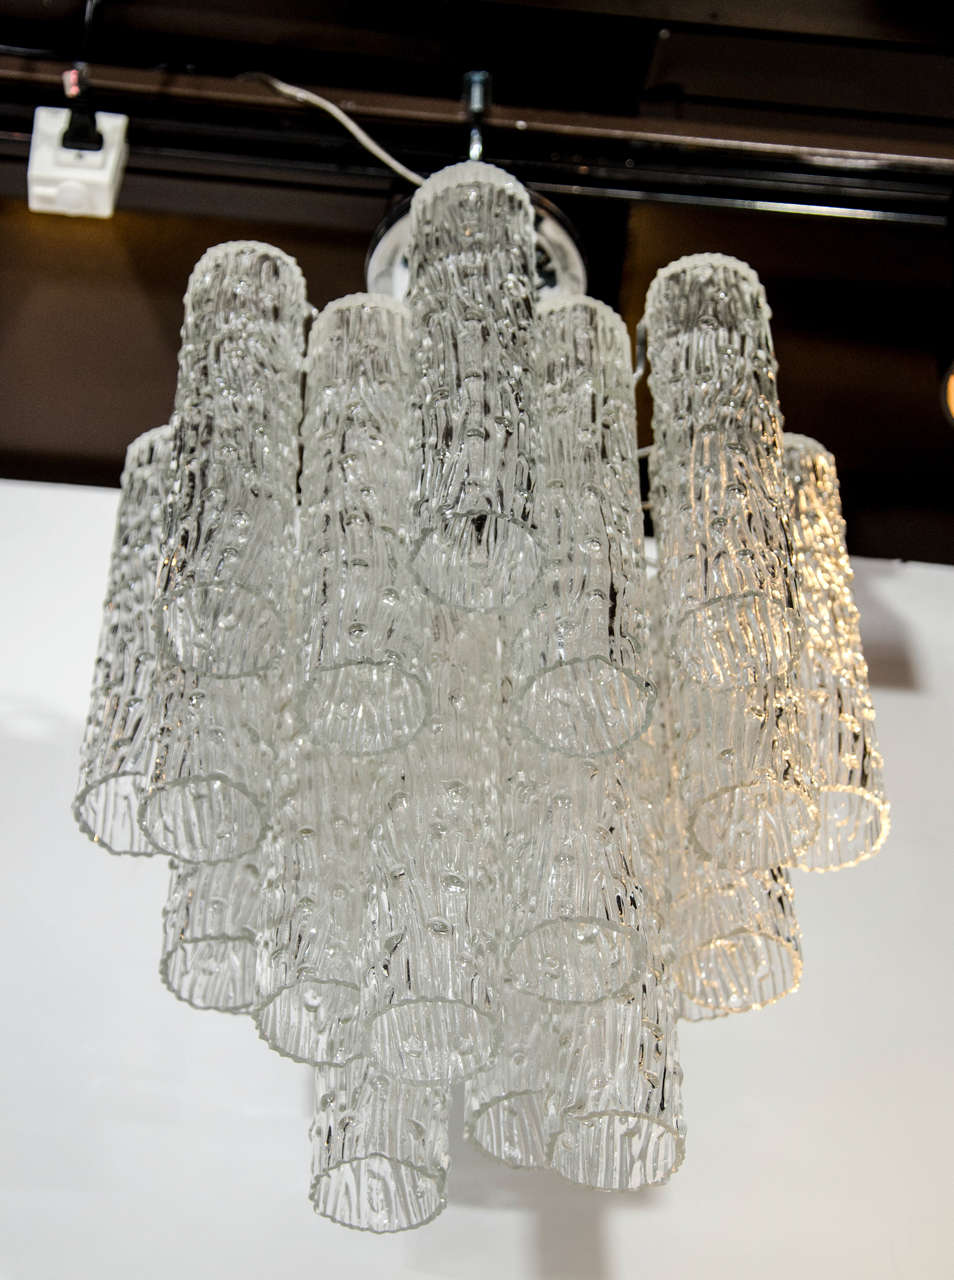 20th Century Modernist Chandelier with Stylized Murano Glass Cylinders by Venini